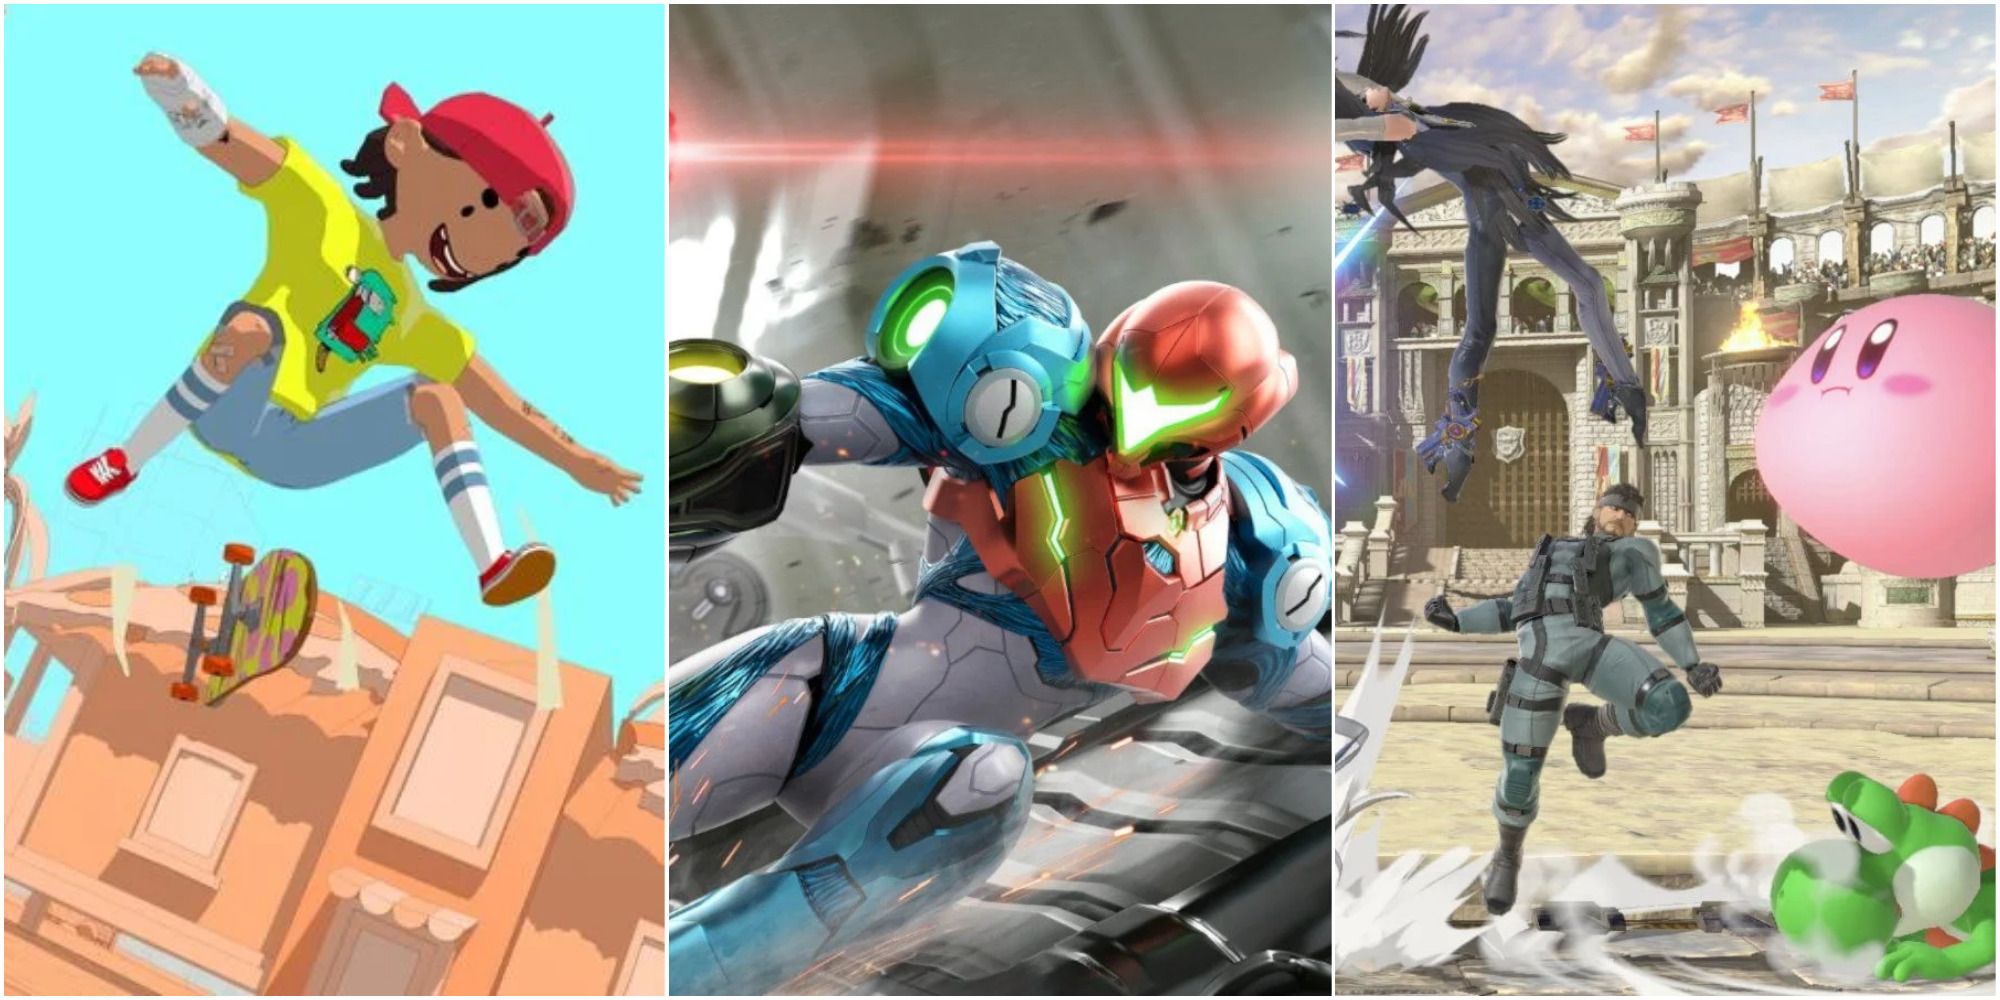 A collage of screenshots from OlliOlli World, Metroid Dread, and Super Smash Bros. Ultimate